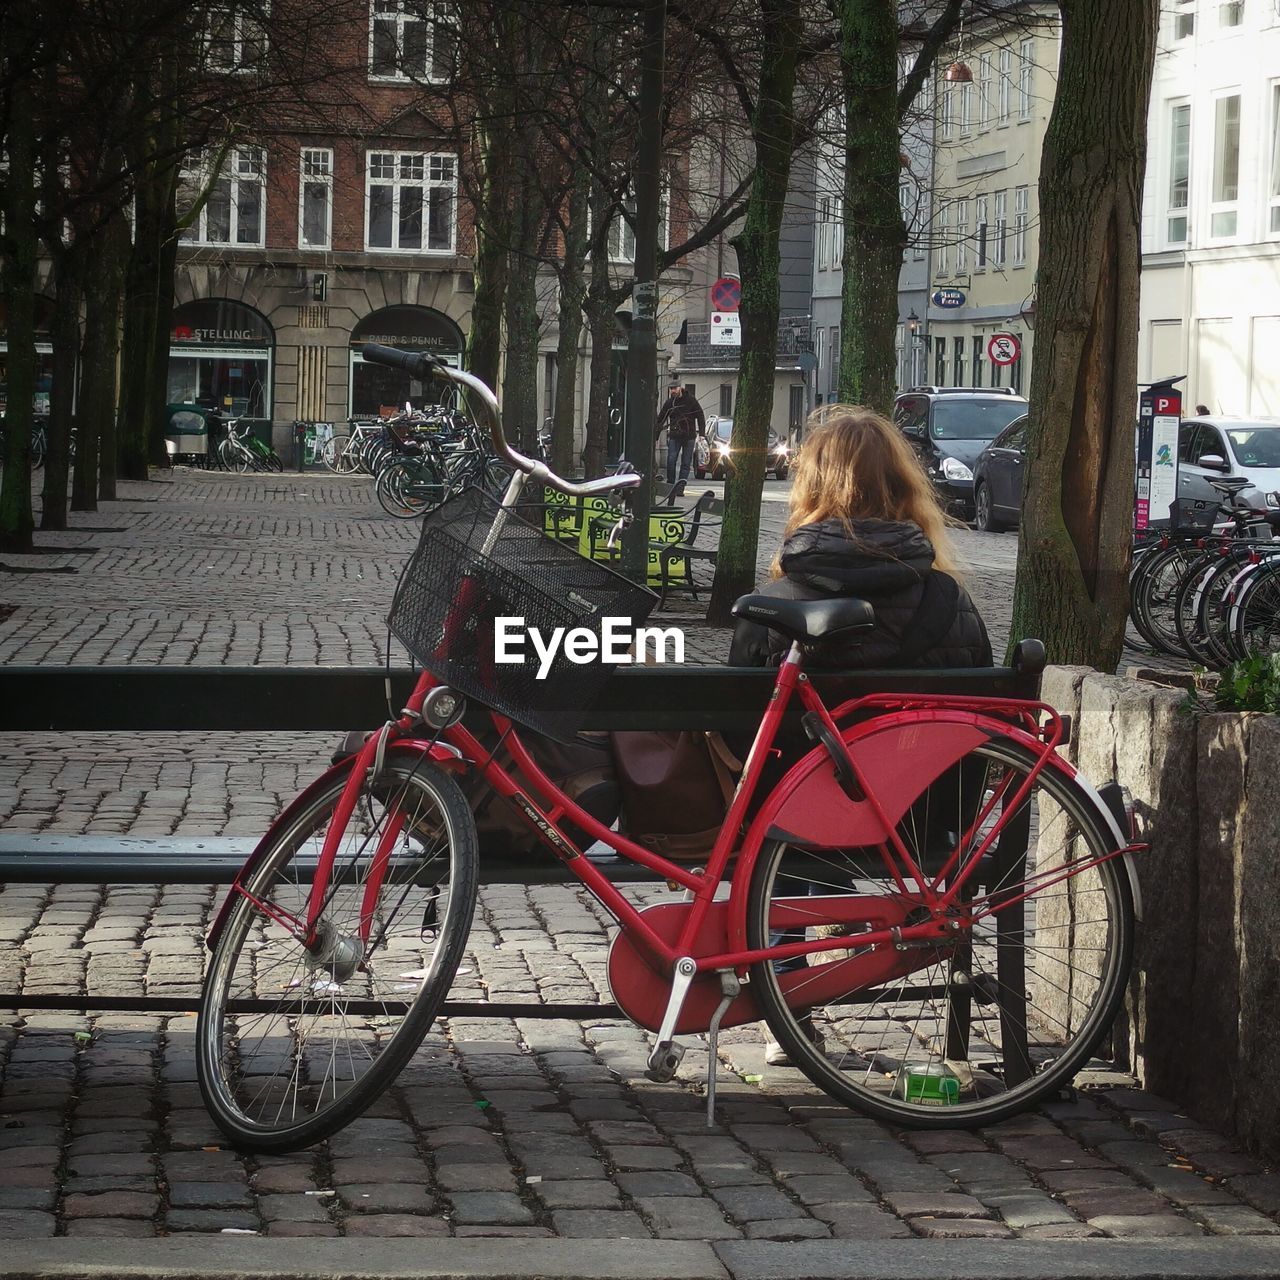 Bicycle on cobblestone street with woman sitting on bench